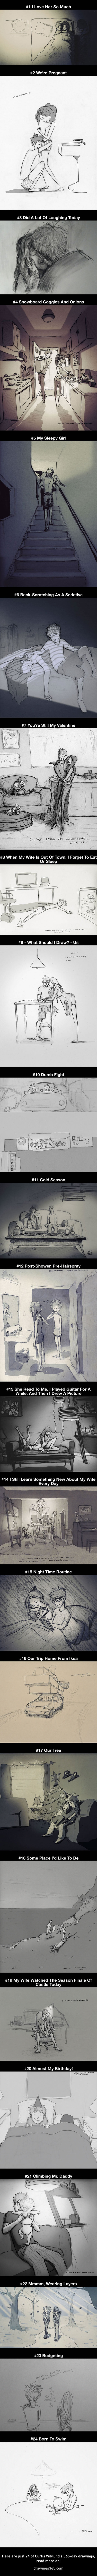 He Illustrated Every Single Day He Spent With His Beloved Wife (24 Pics)